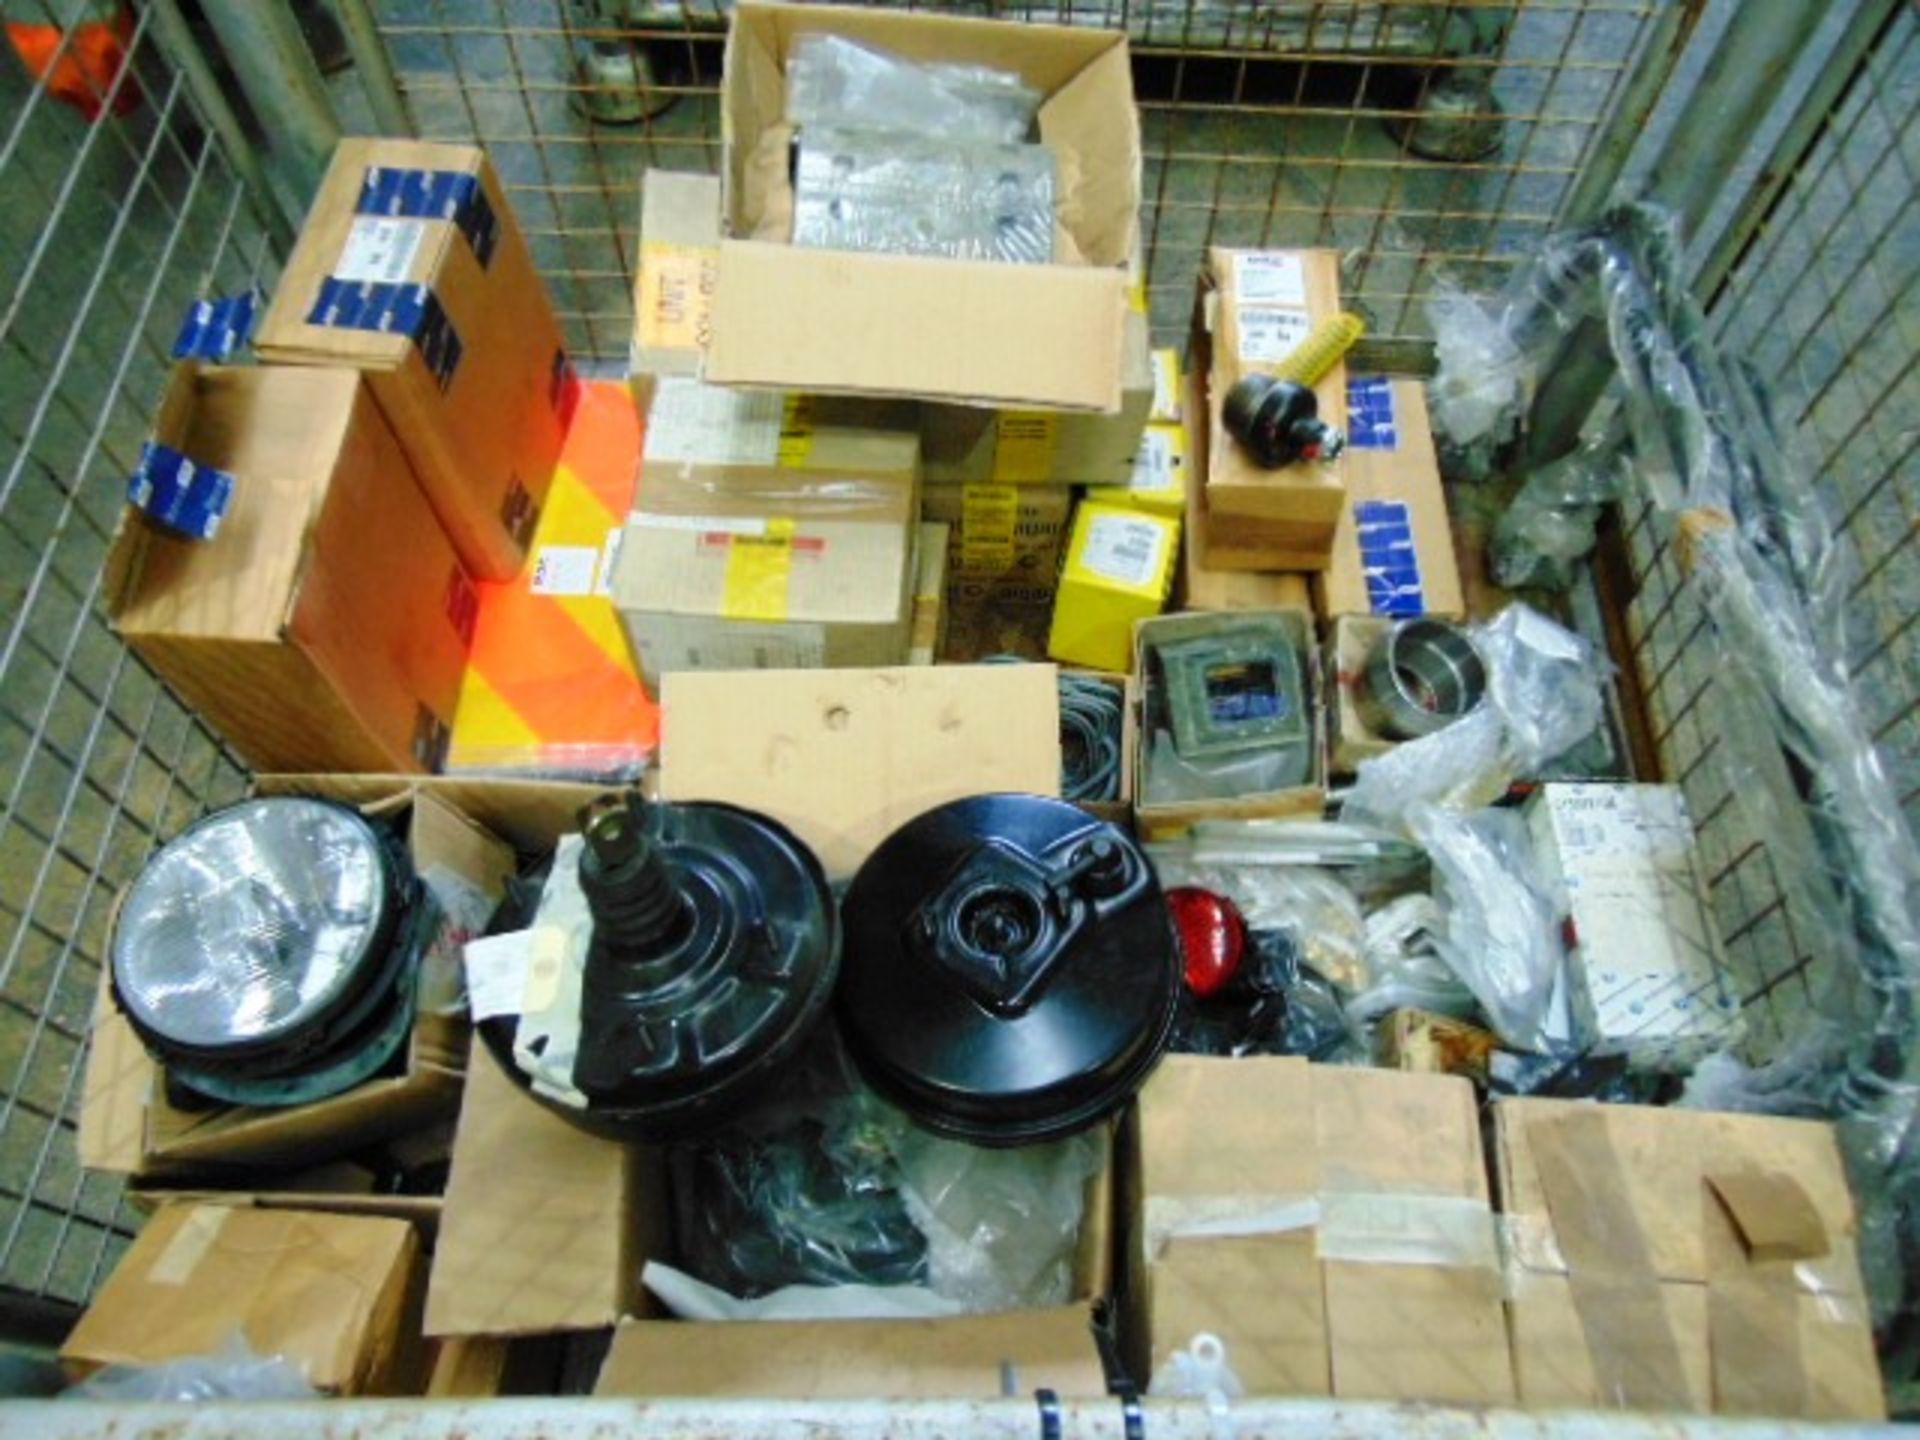 Mixed Stillage of Truck Parts inc Lights, Ball Joints, Filters, Cables etc